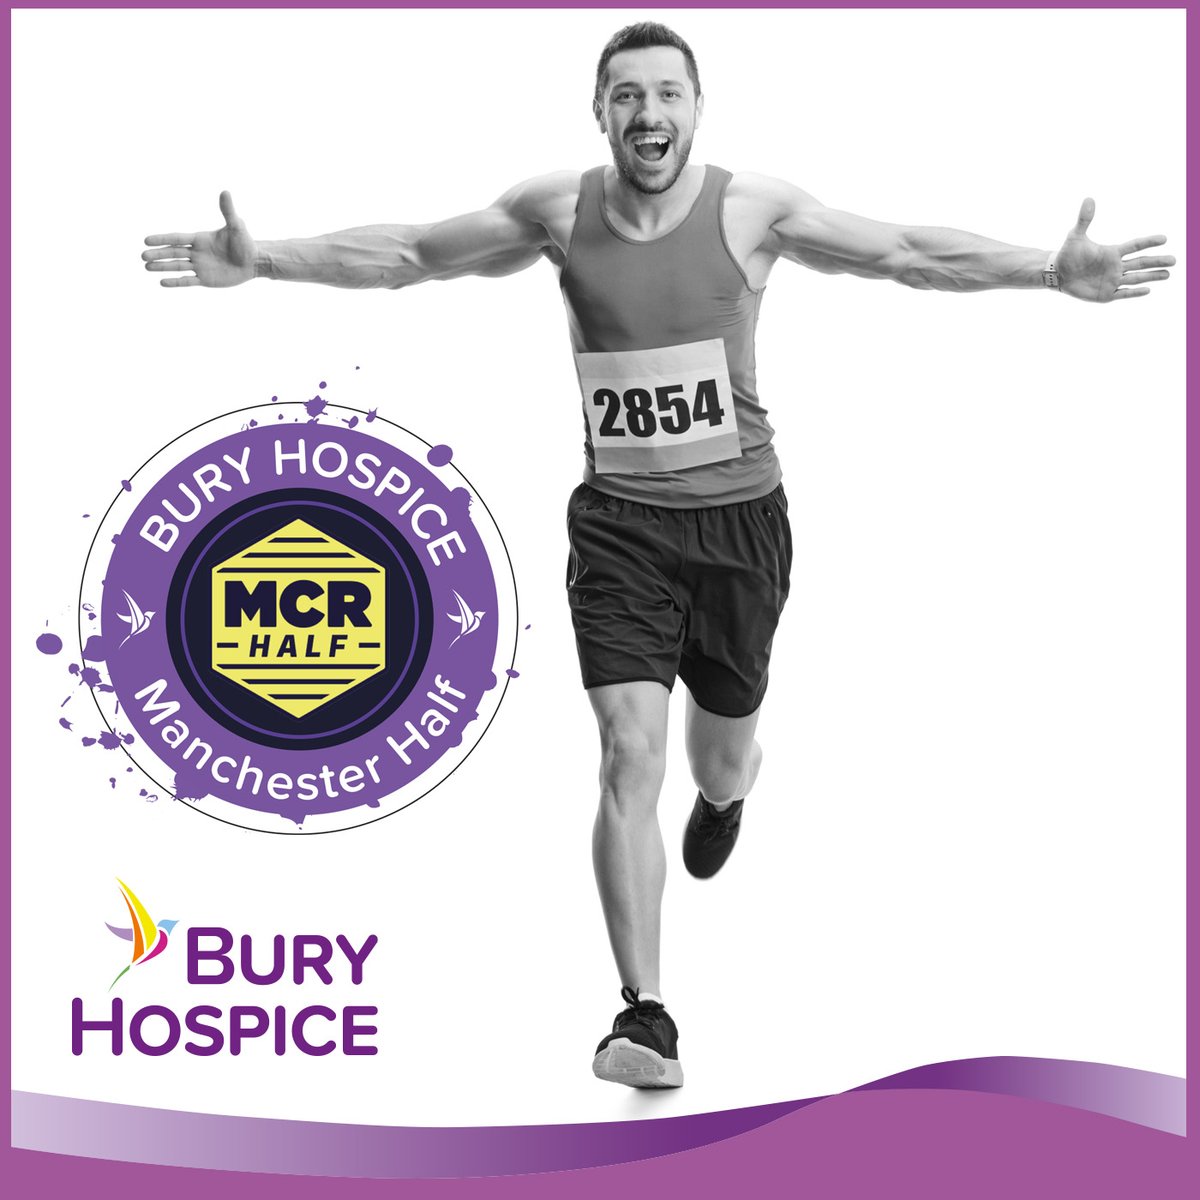 Join us on Sunday 13th October for the Manchester Half. We have 25 places which we are offering free of charge with a pledge to raise £350 for Bury Hospice. Head here for more information: buryhospice.org.uk/manchester-hal…